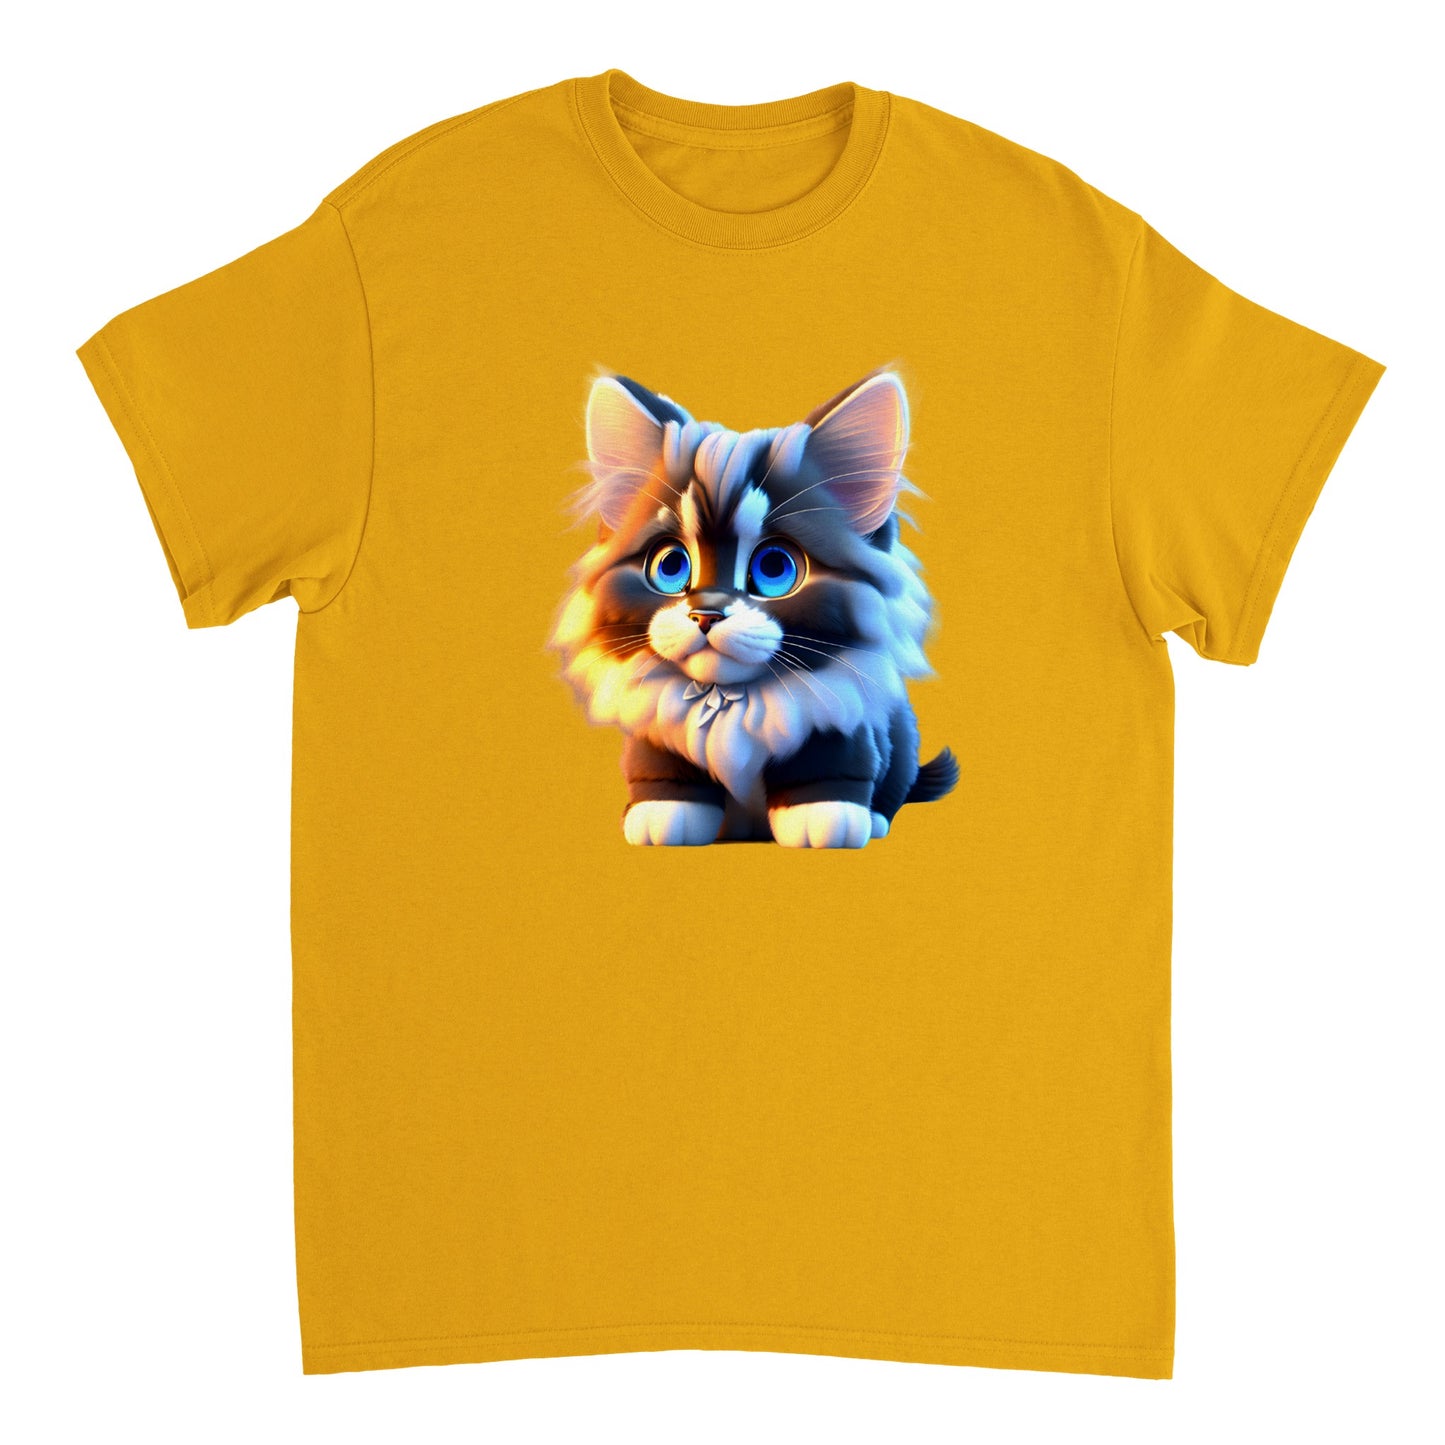 Adorable, Cool, Cute Cats and Kittens Toy - Heavyweight Unisex Crewneck T-shirt 6